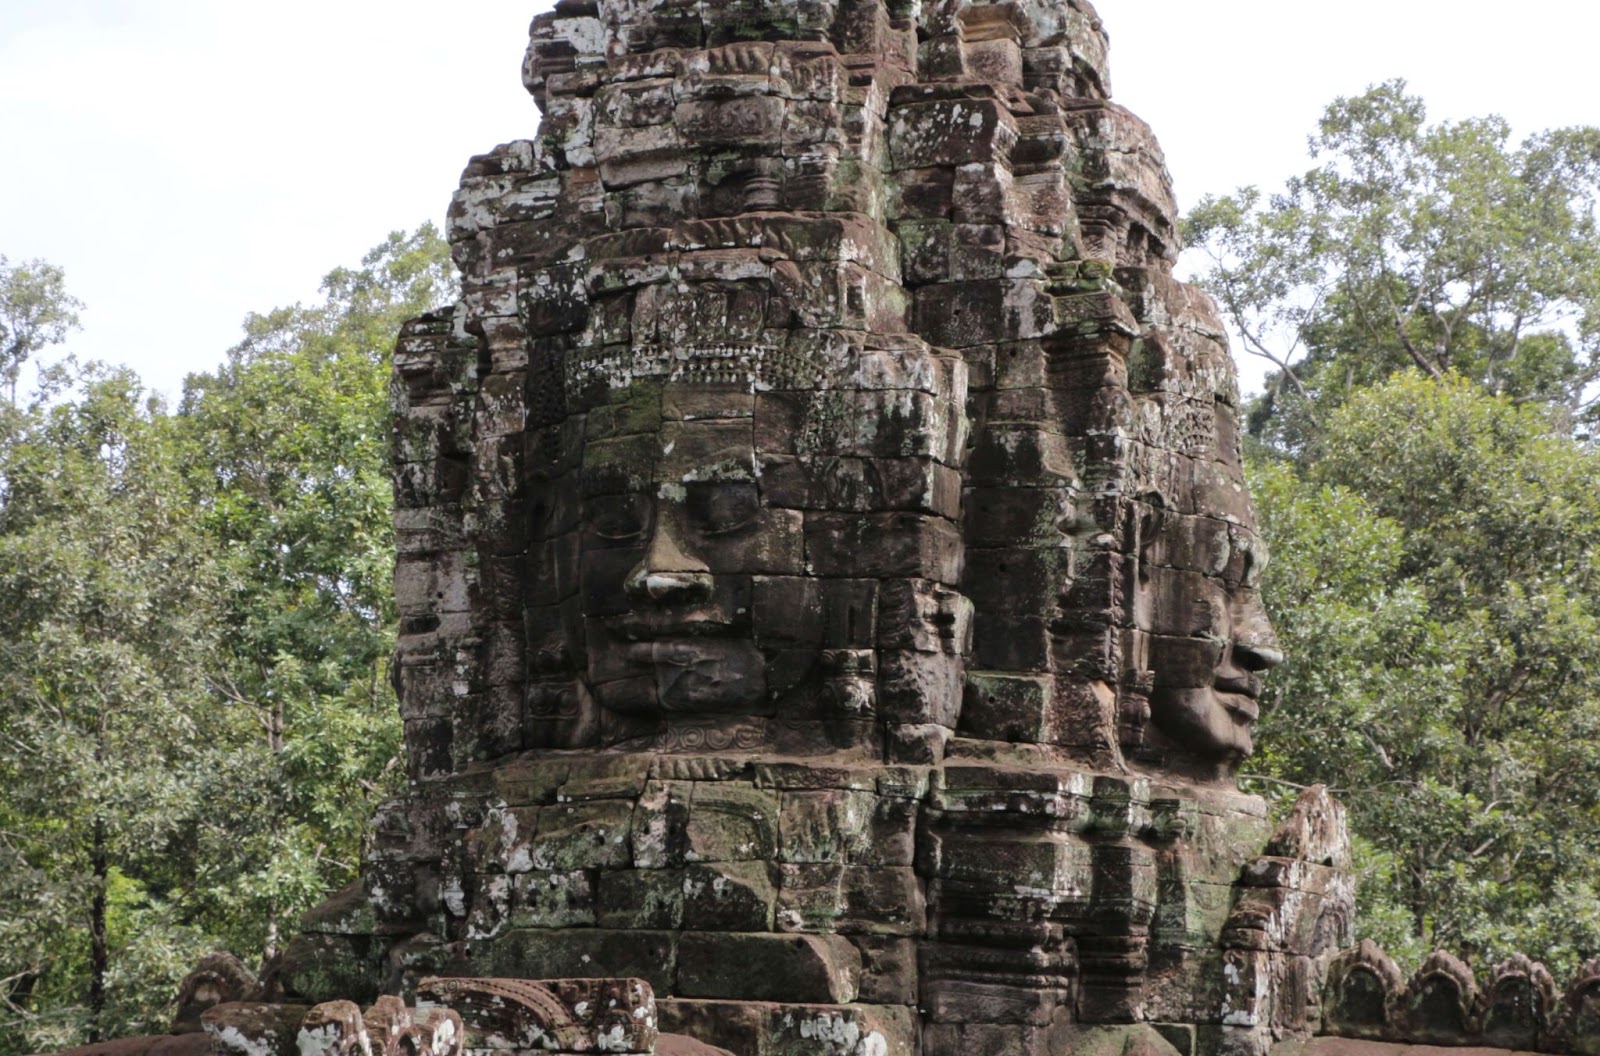 One of the many stone faces at Bayon which was the second of our interesting places in Siem Reap.